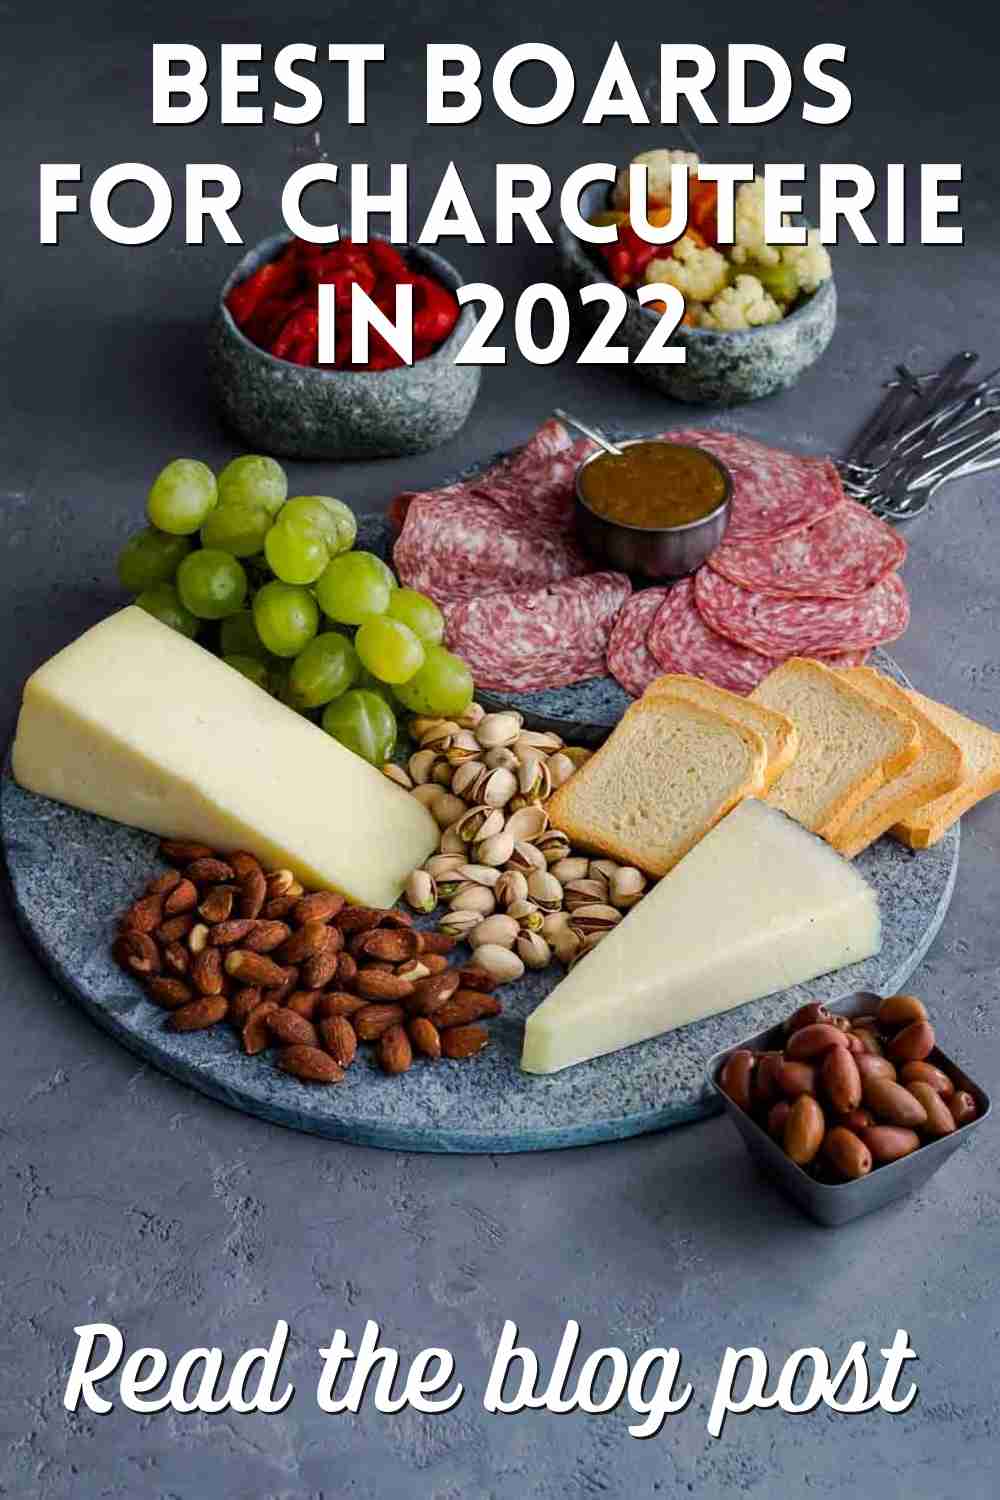 The Best Boards for Charcuterie in 2022